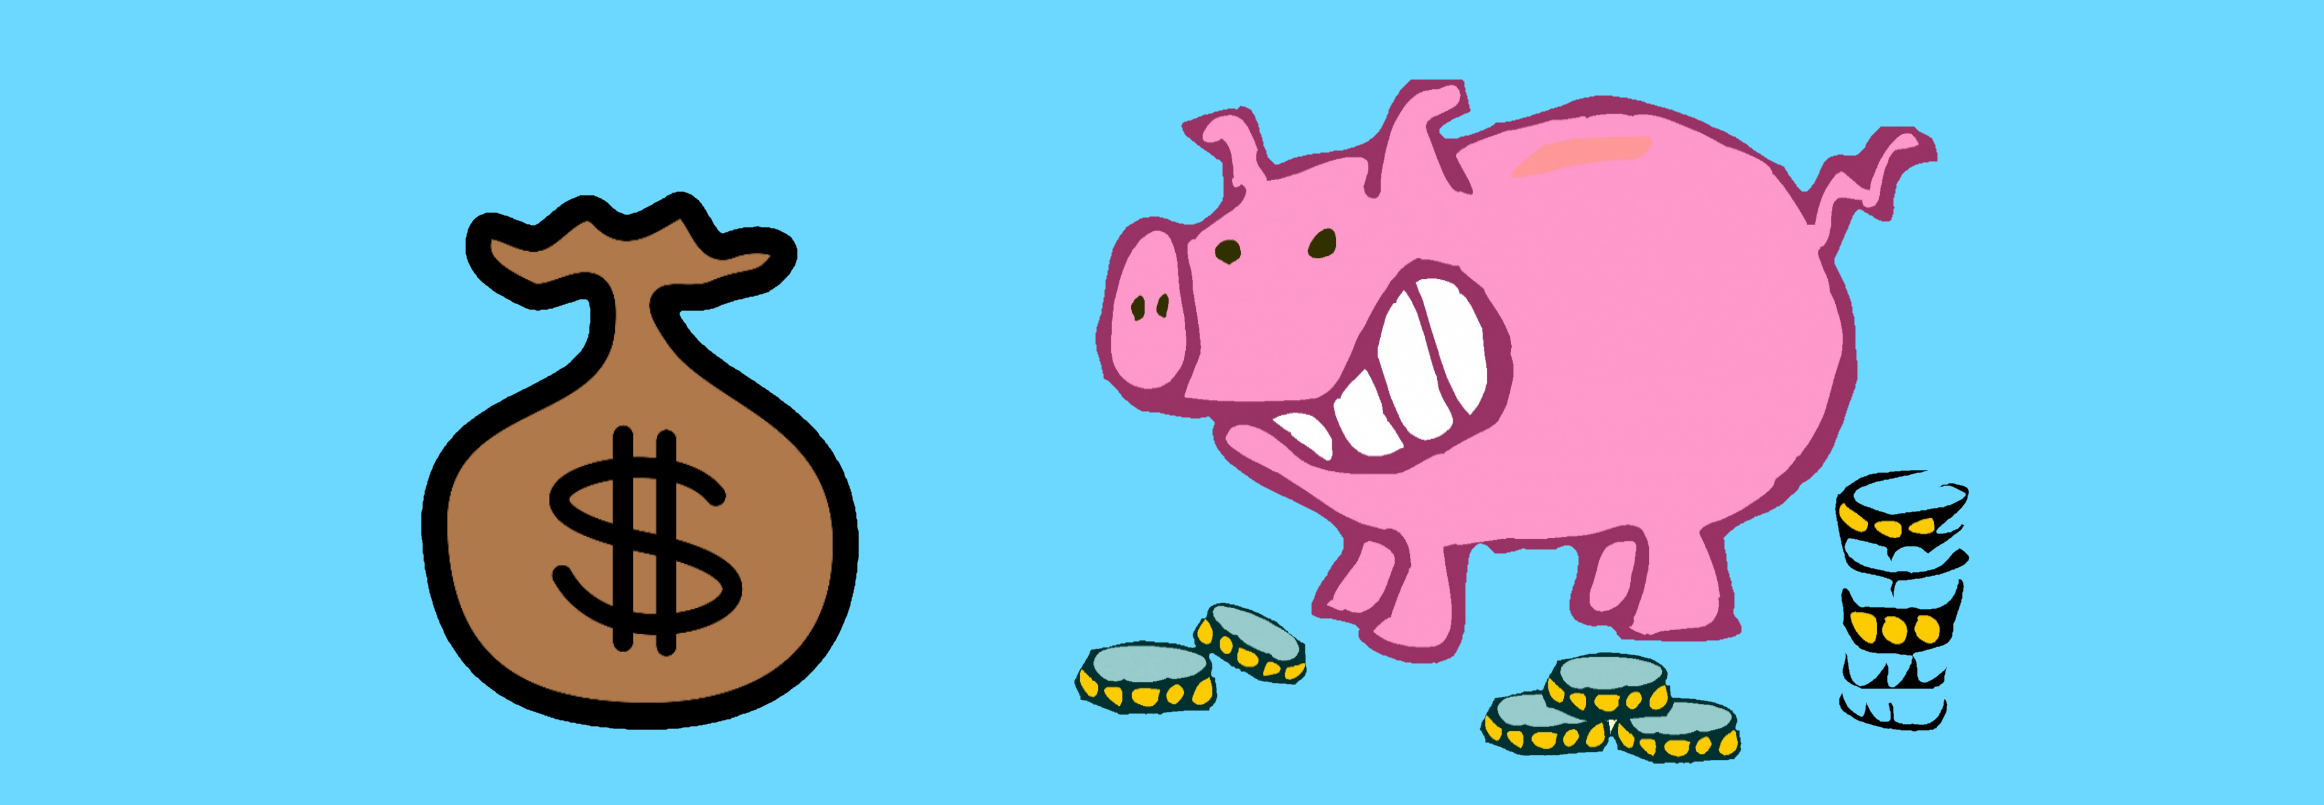 A doodle of a happy piggybank and a sac of money